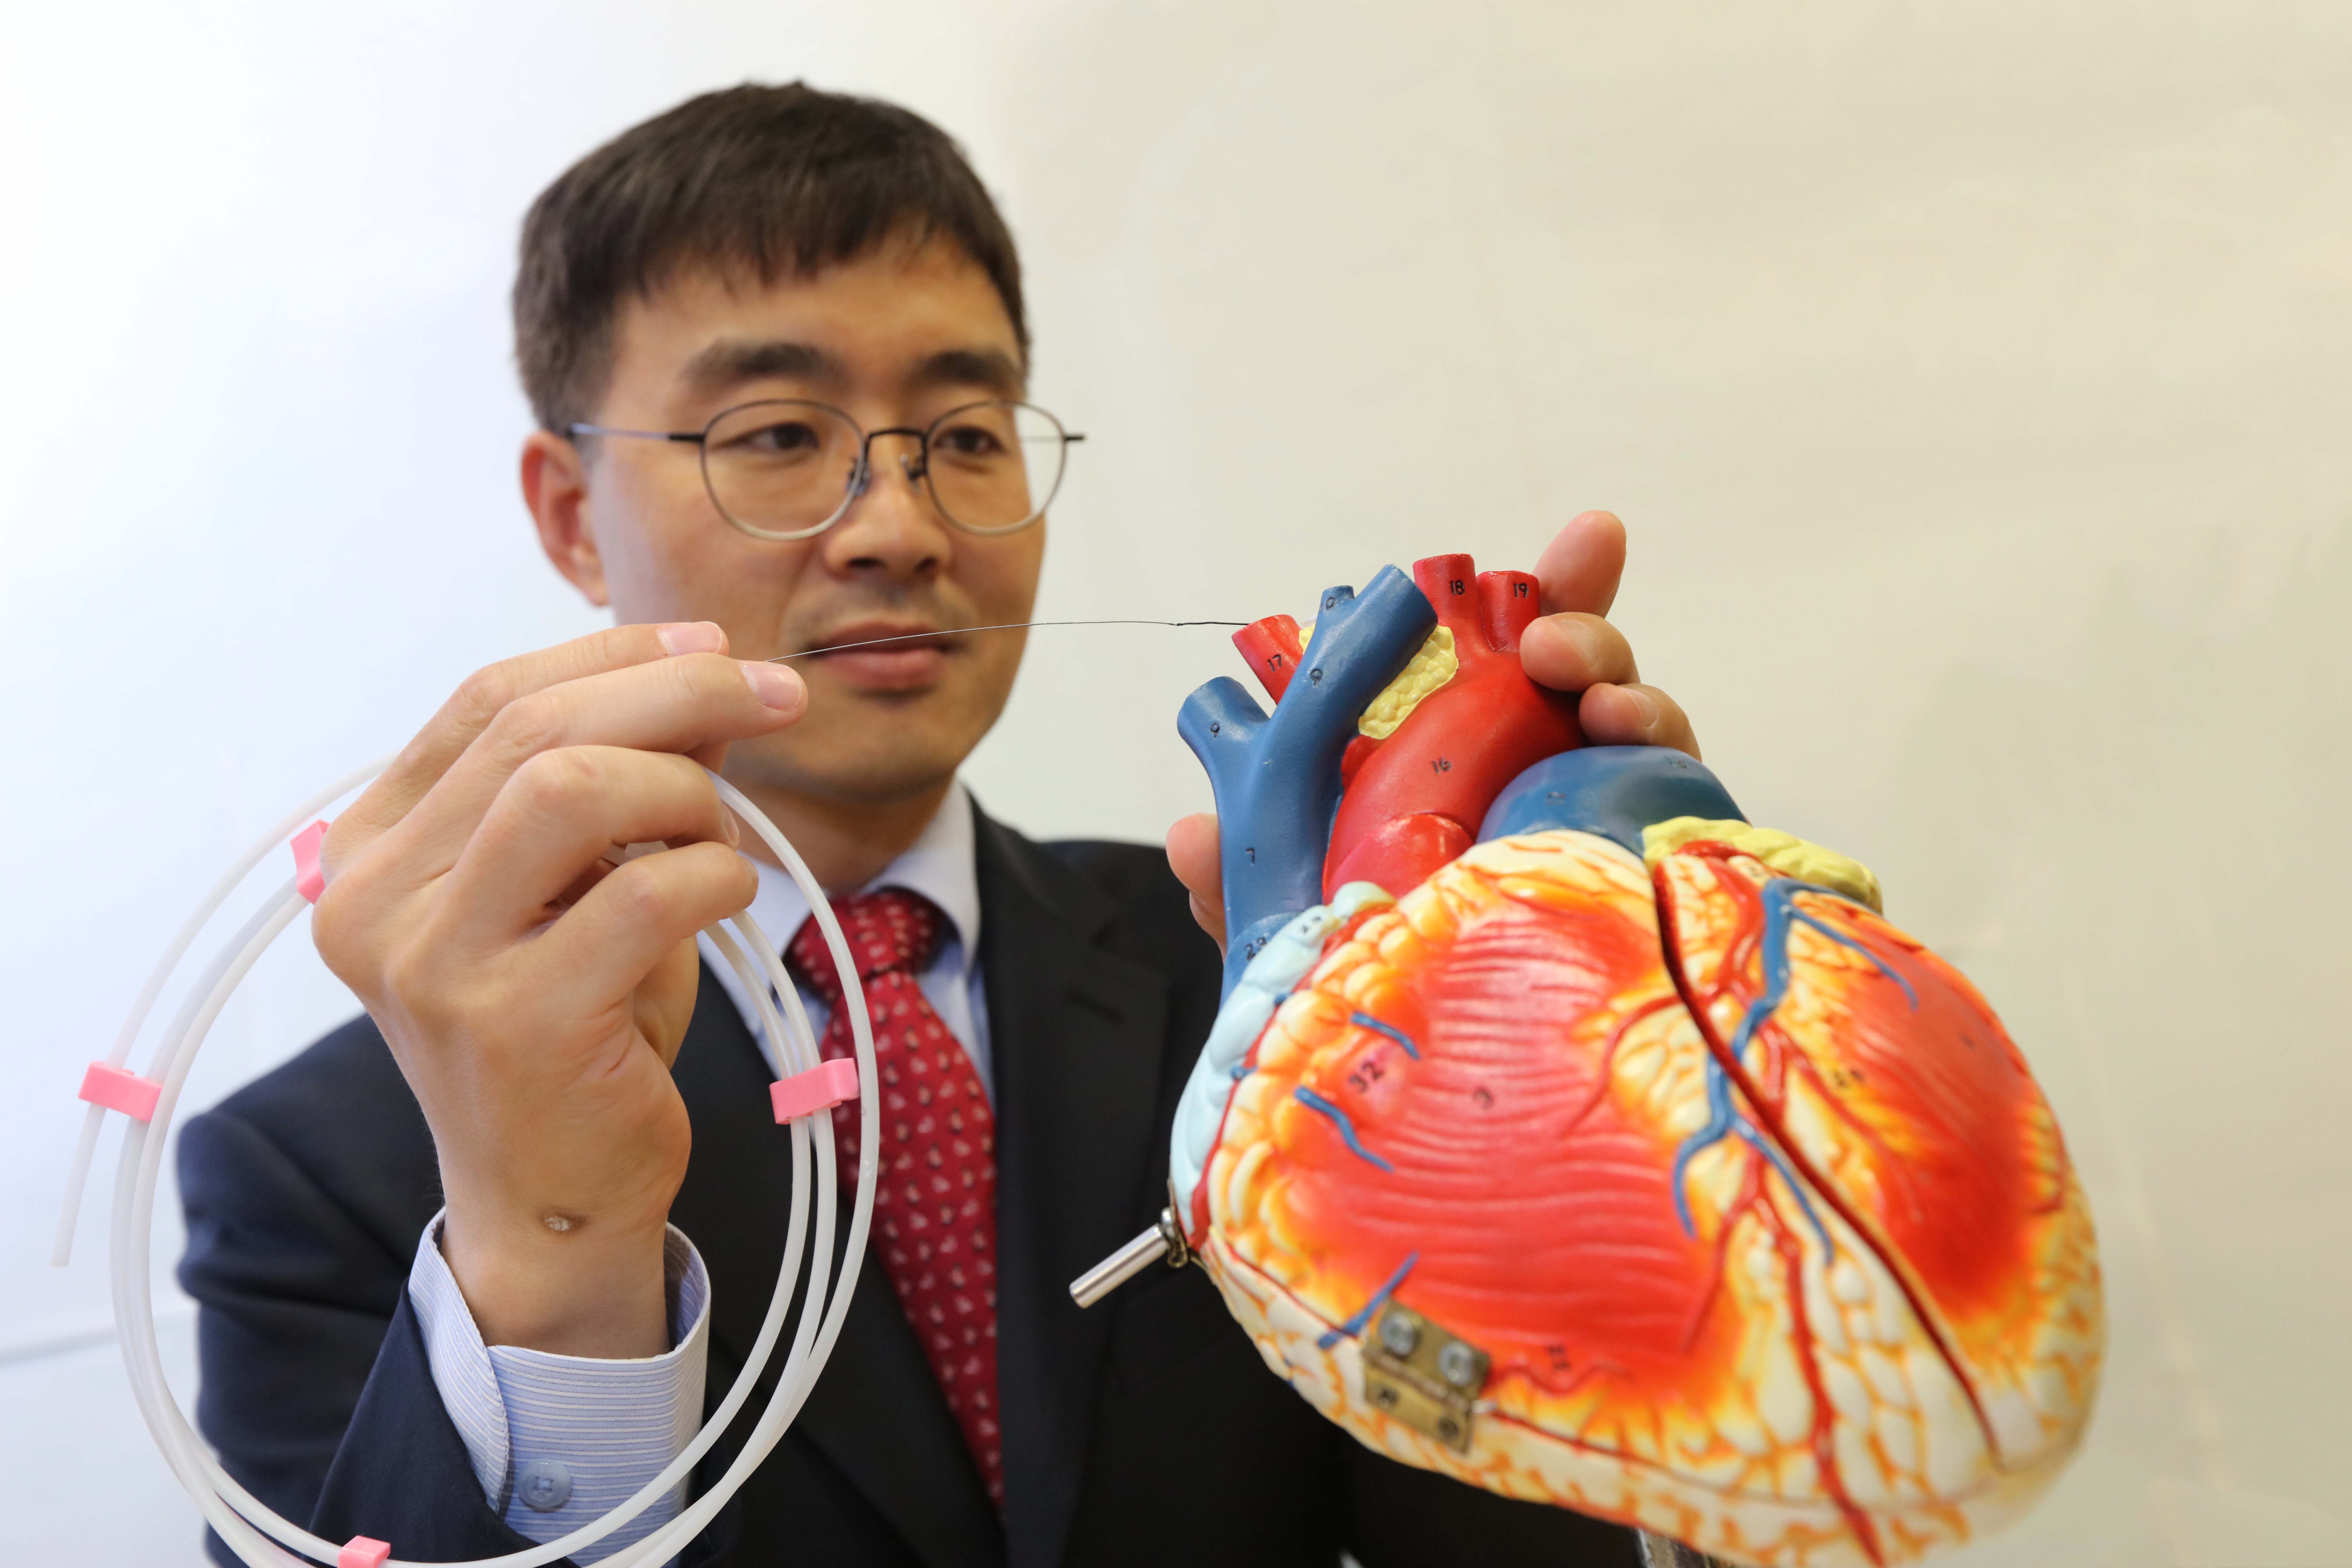  Prof. Hongsoo CHOI demonstrates how a guidewire-based microbot may be used for a robot-assisted percutaneous coronary intervention procedure.